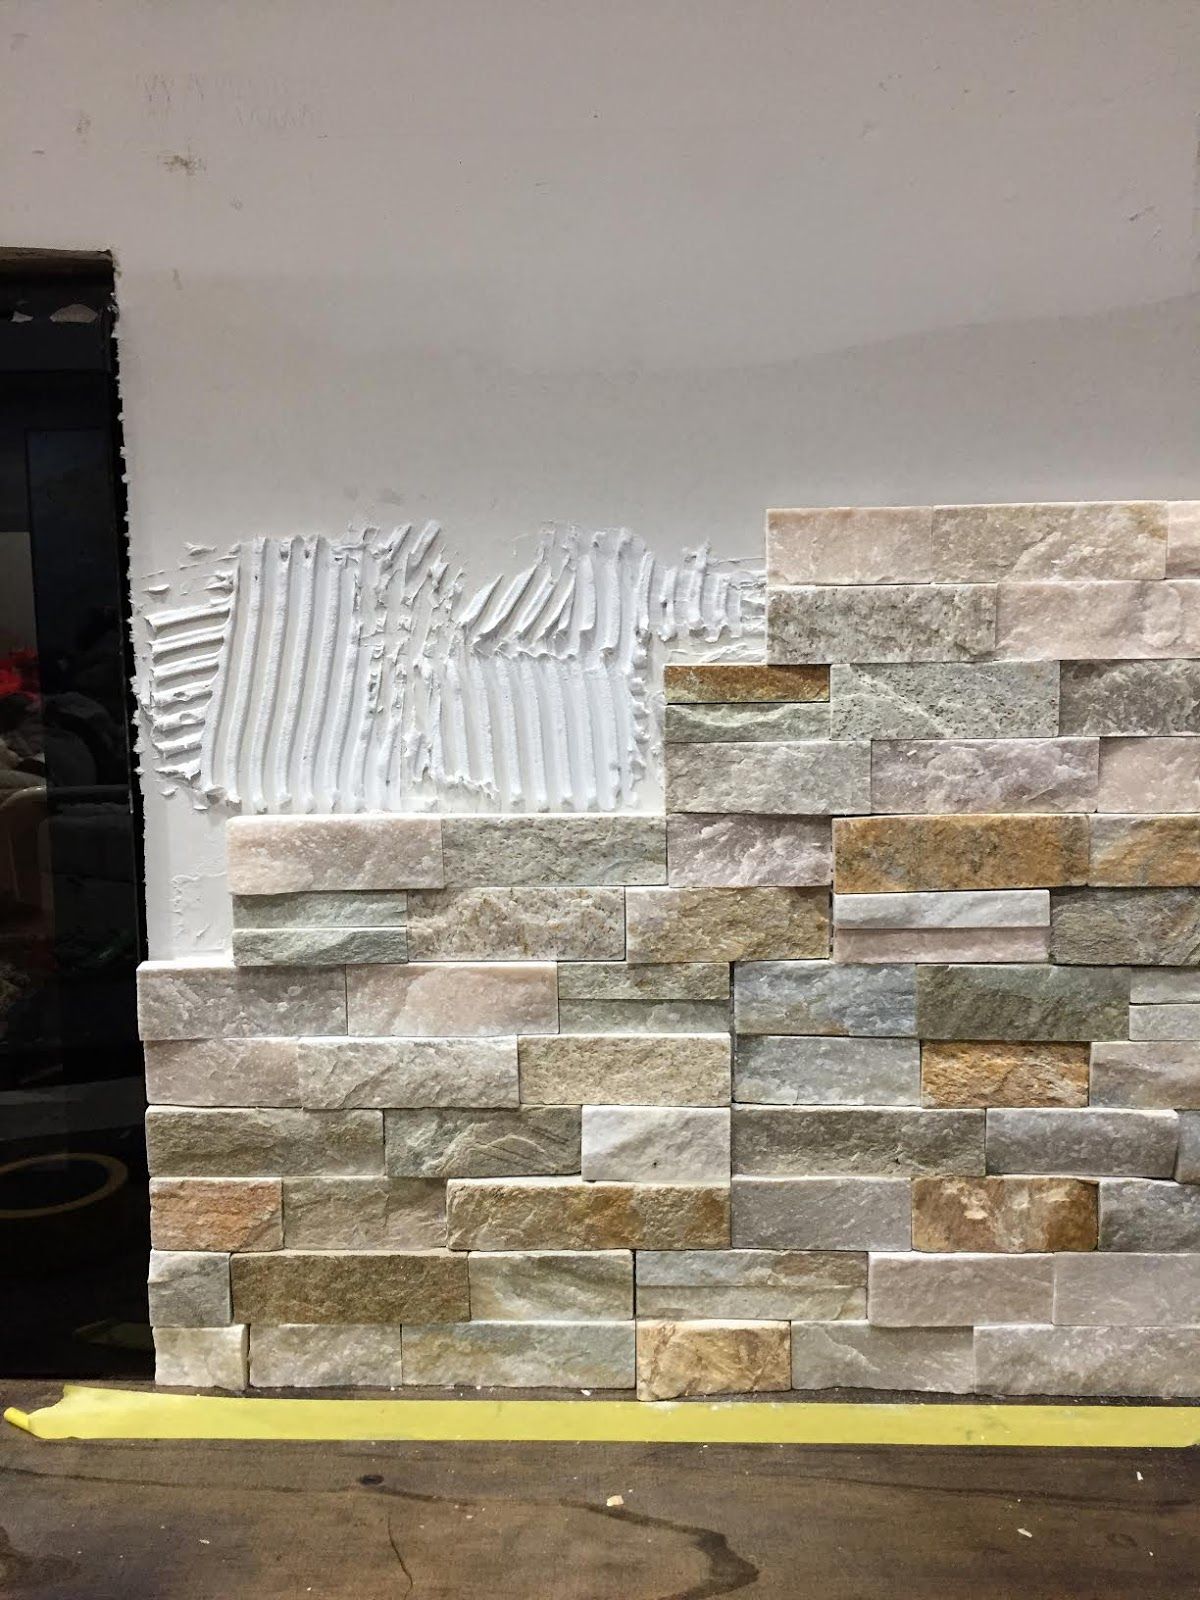 Fireplace Refacing Kits New How to Install Stacked Stone Tile On A Fireplace Wall